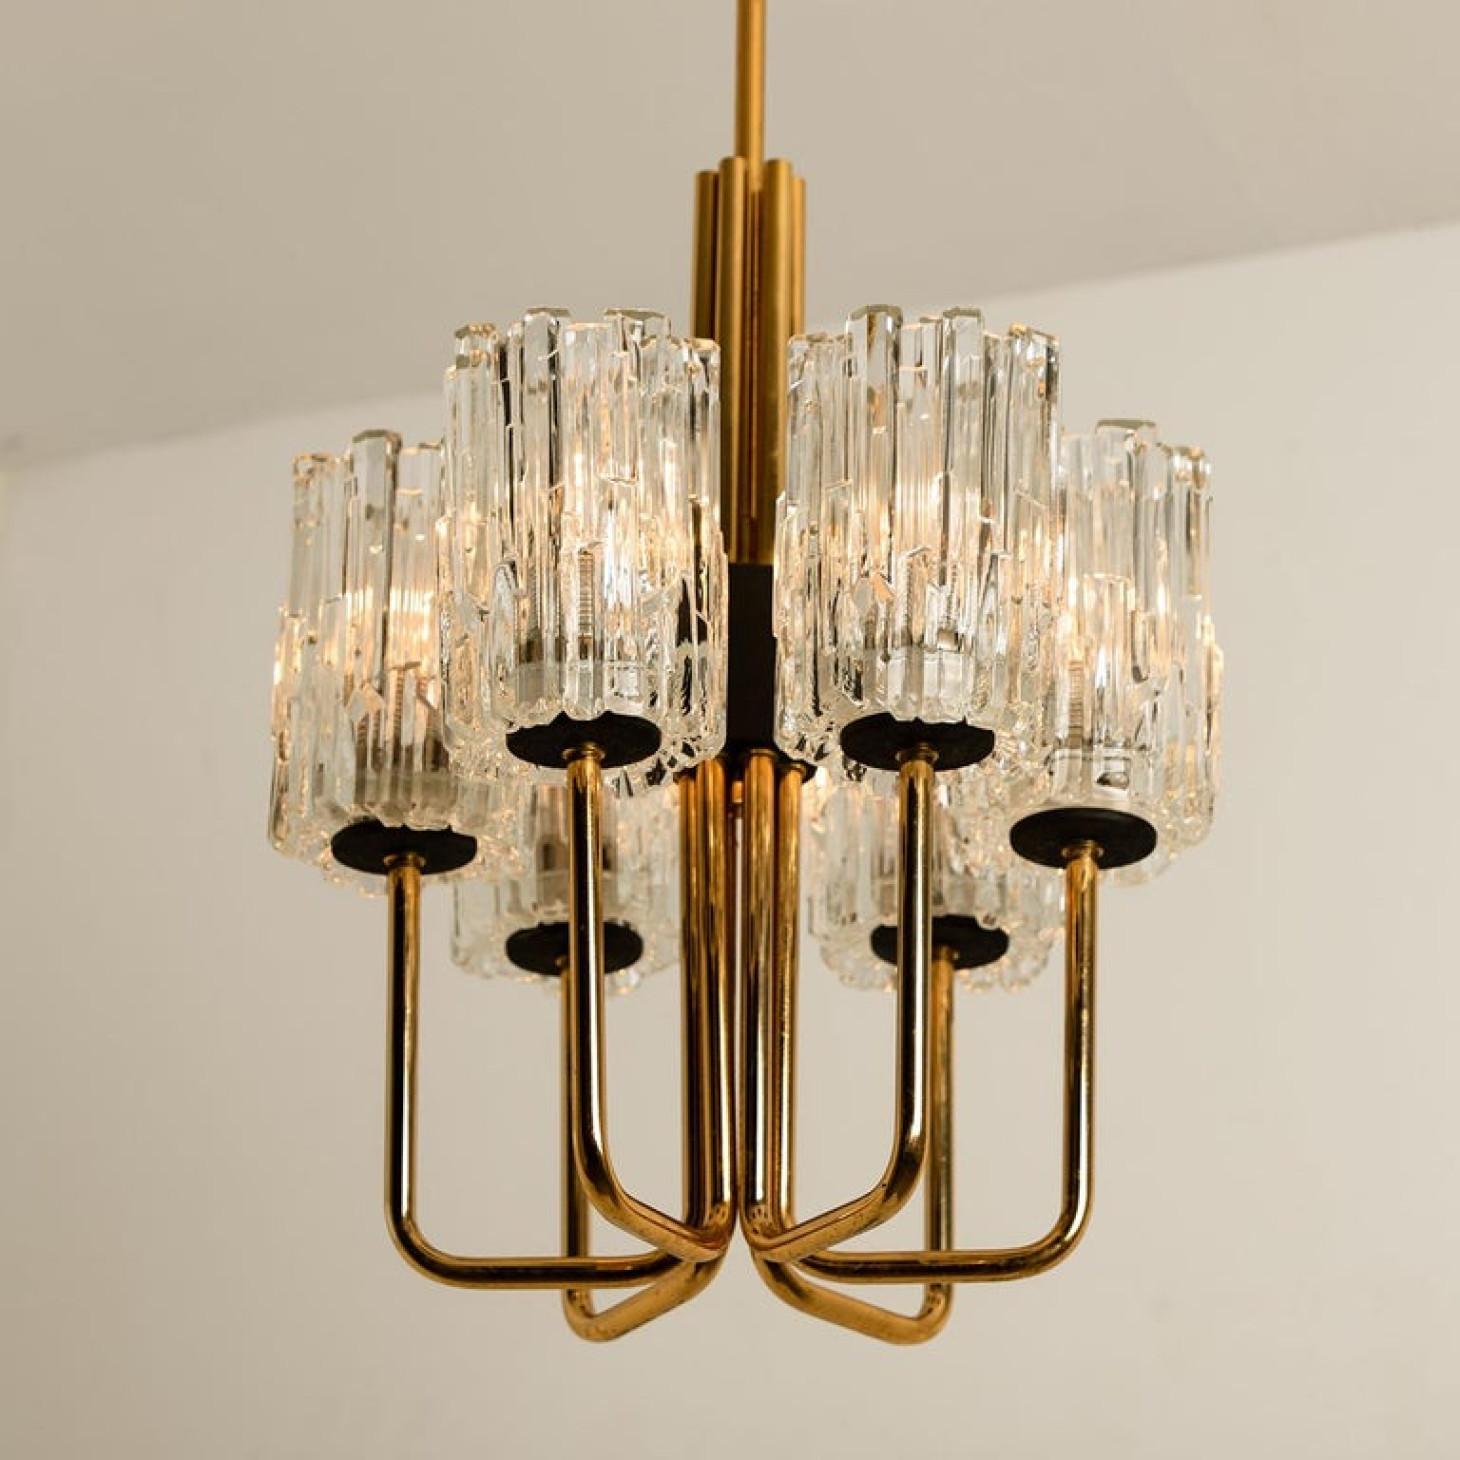 Midcentury Brass and Blown Glass Chandelier by Hillebrand, 1960s For Sale 9